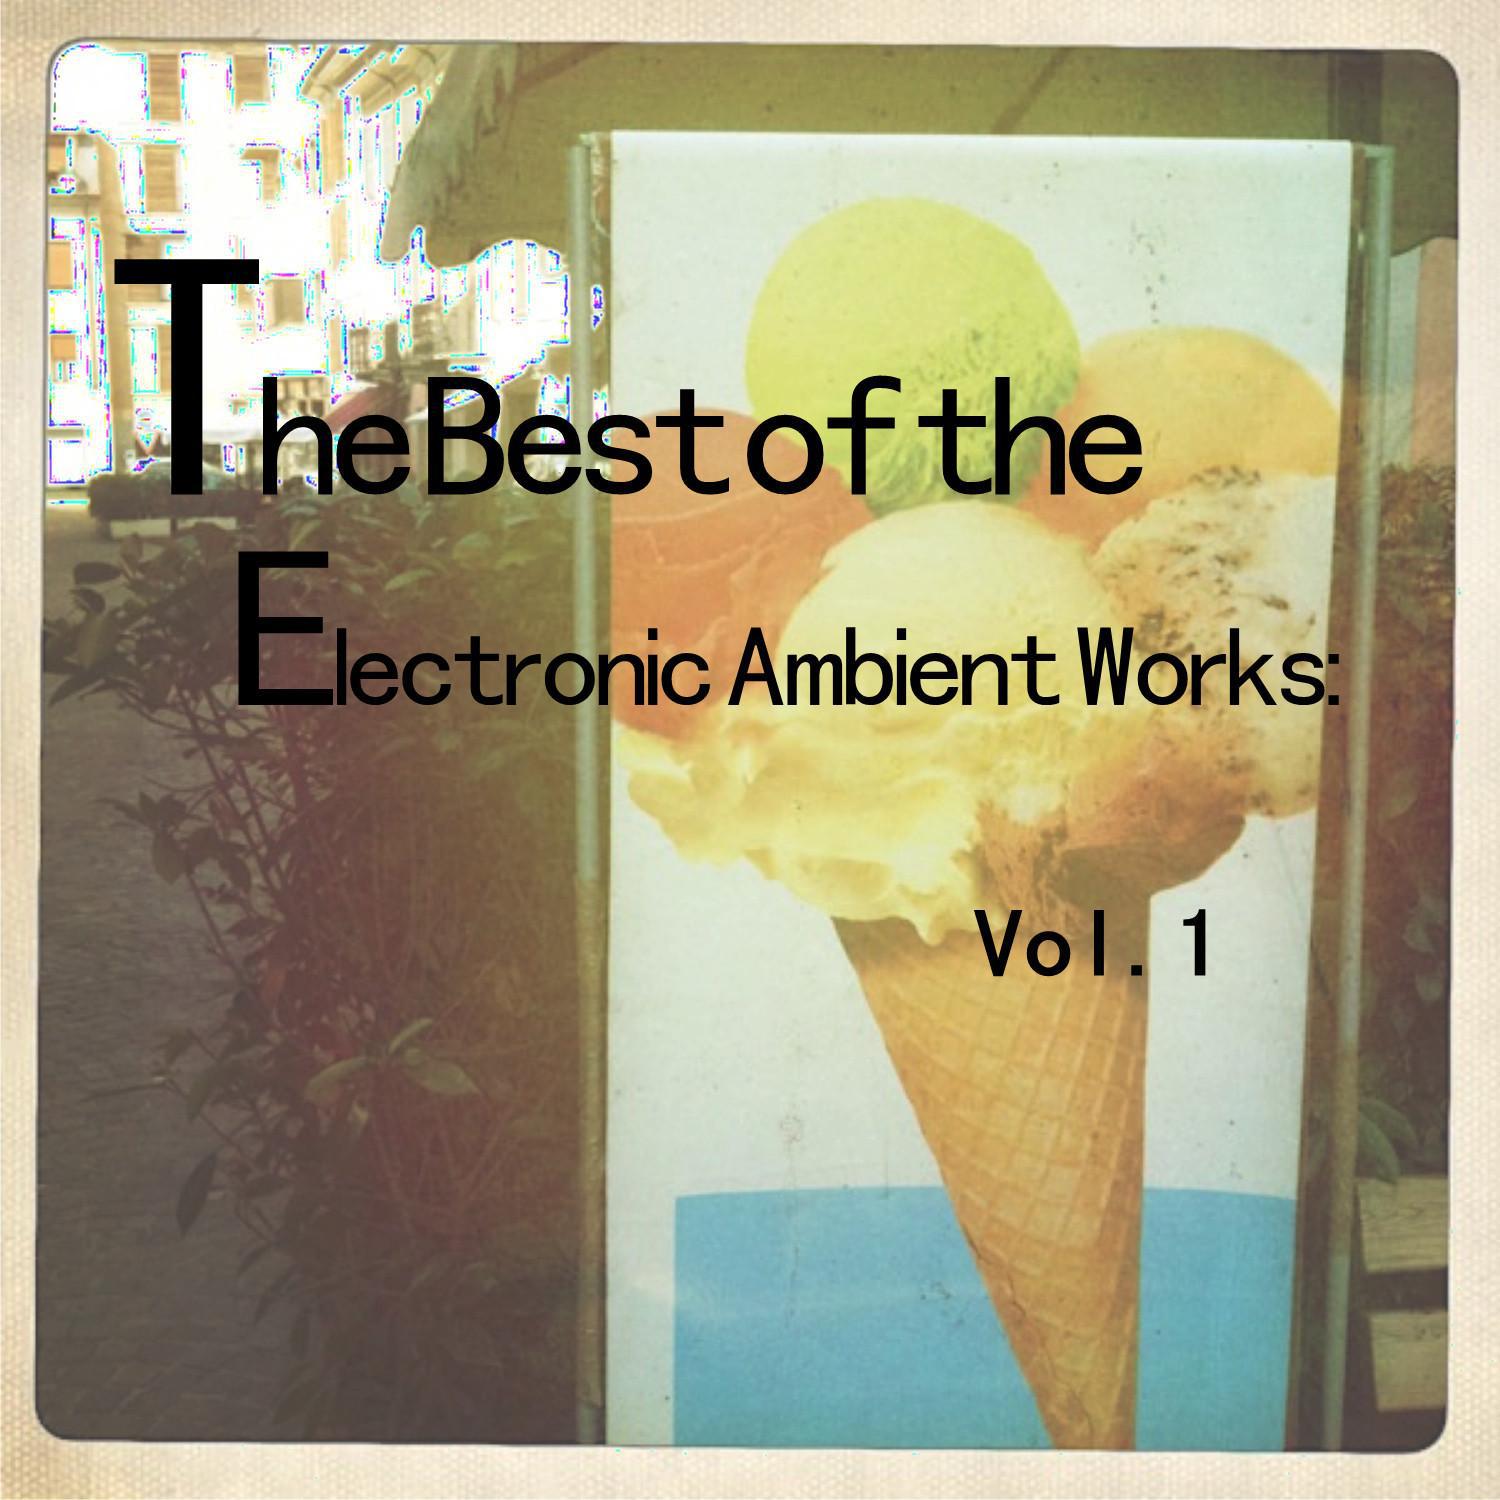 The Best of the Electronic Ambient Works: Vol.1